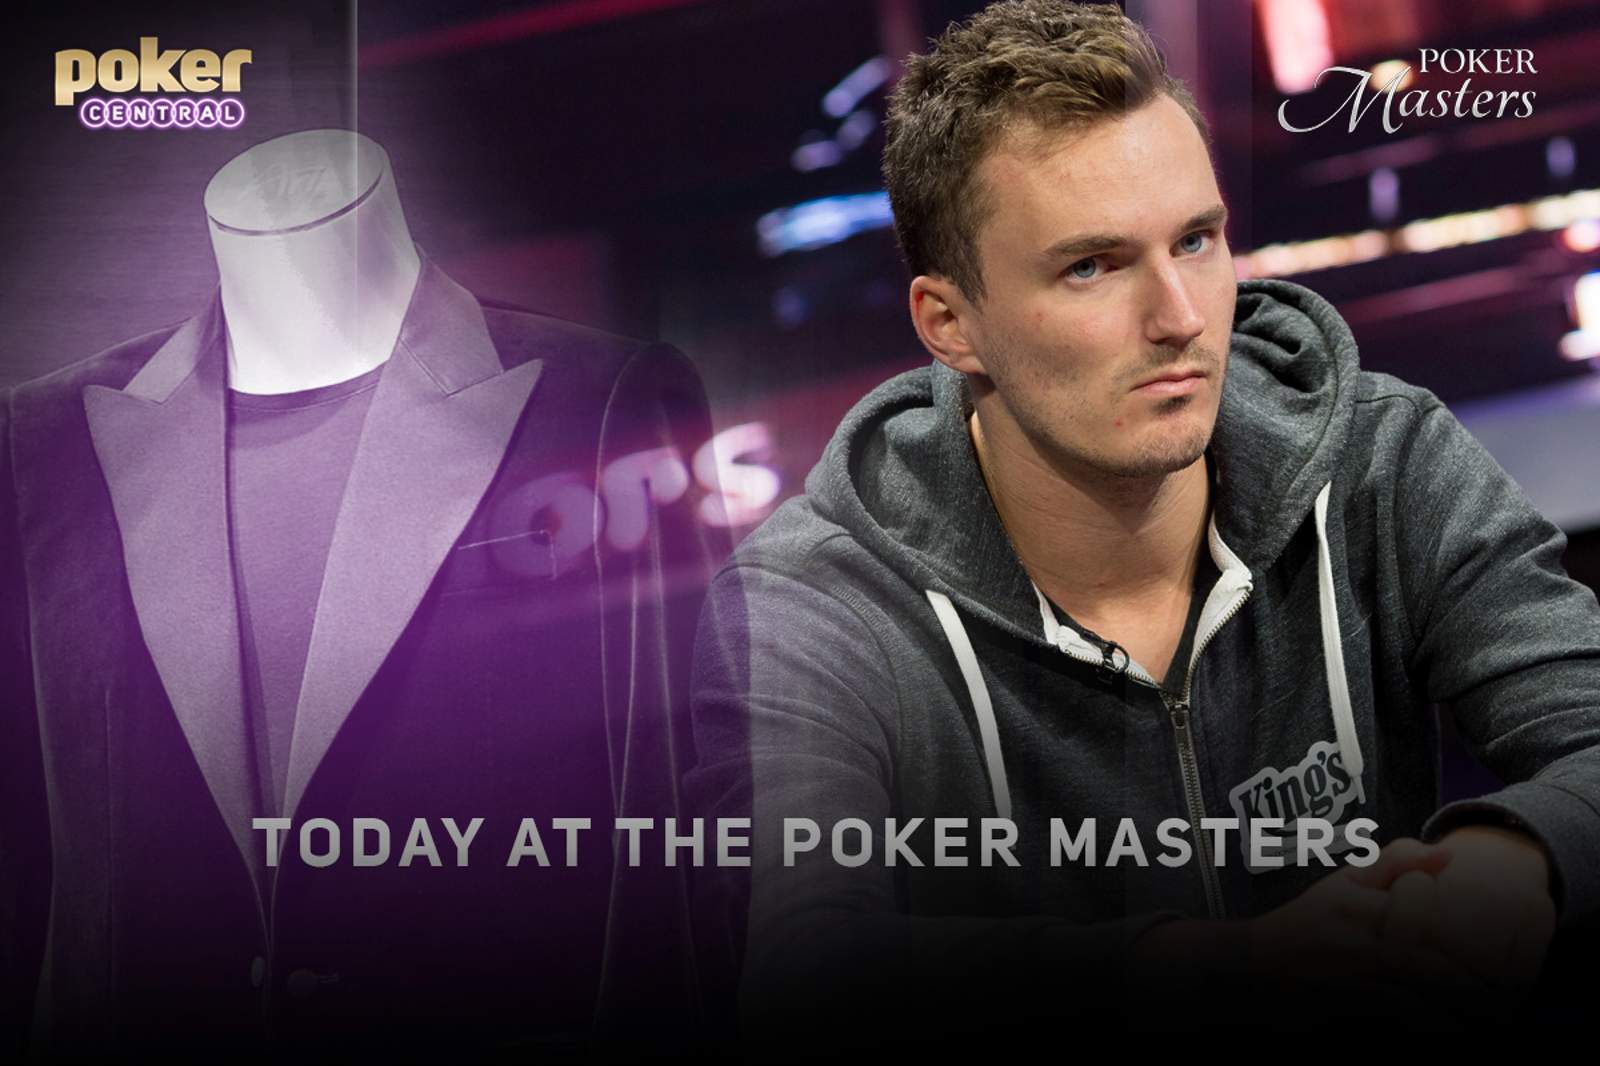 Today at the Poker Masters: Starting Off Strong, Looking Ahead to Saturday